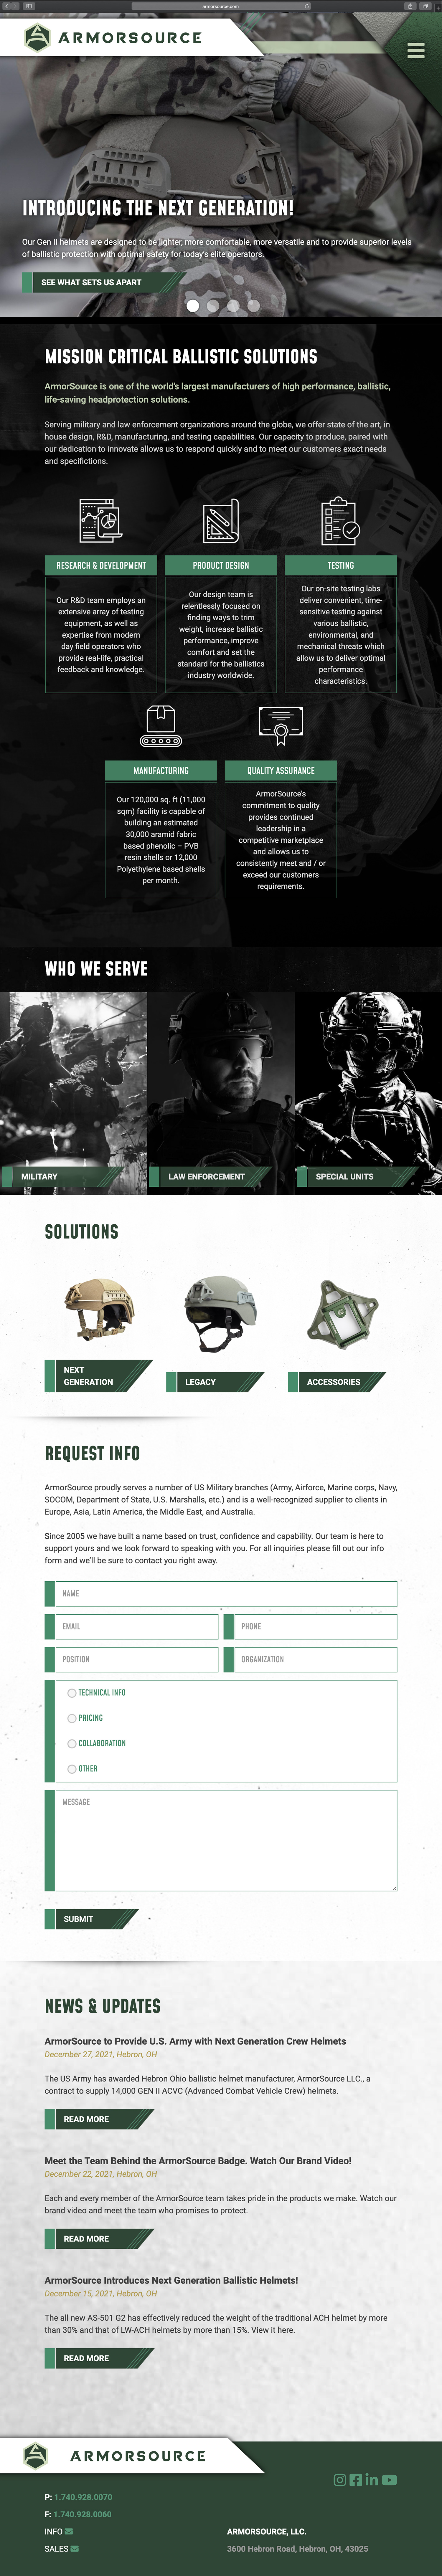 Website design and website development for ArmorSource - homepage view.